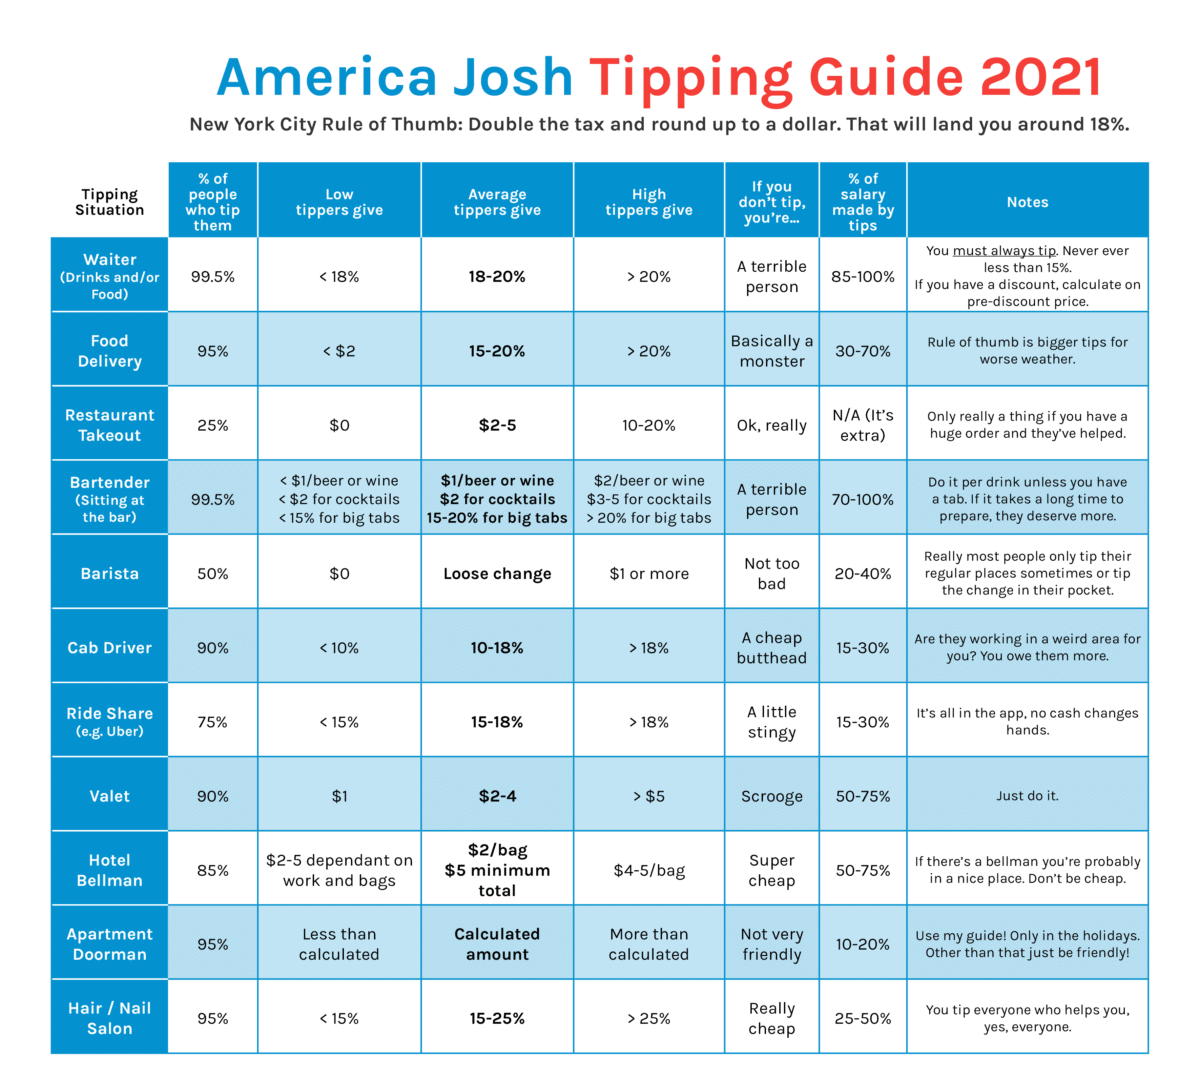 Complete Guide to Tipping in America 2021